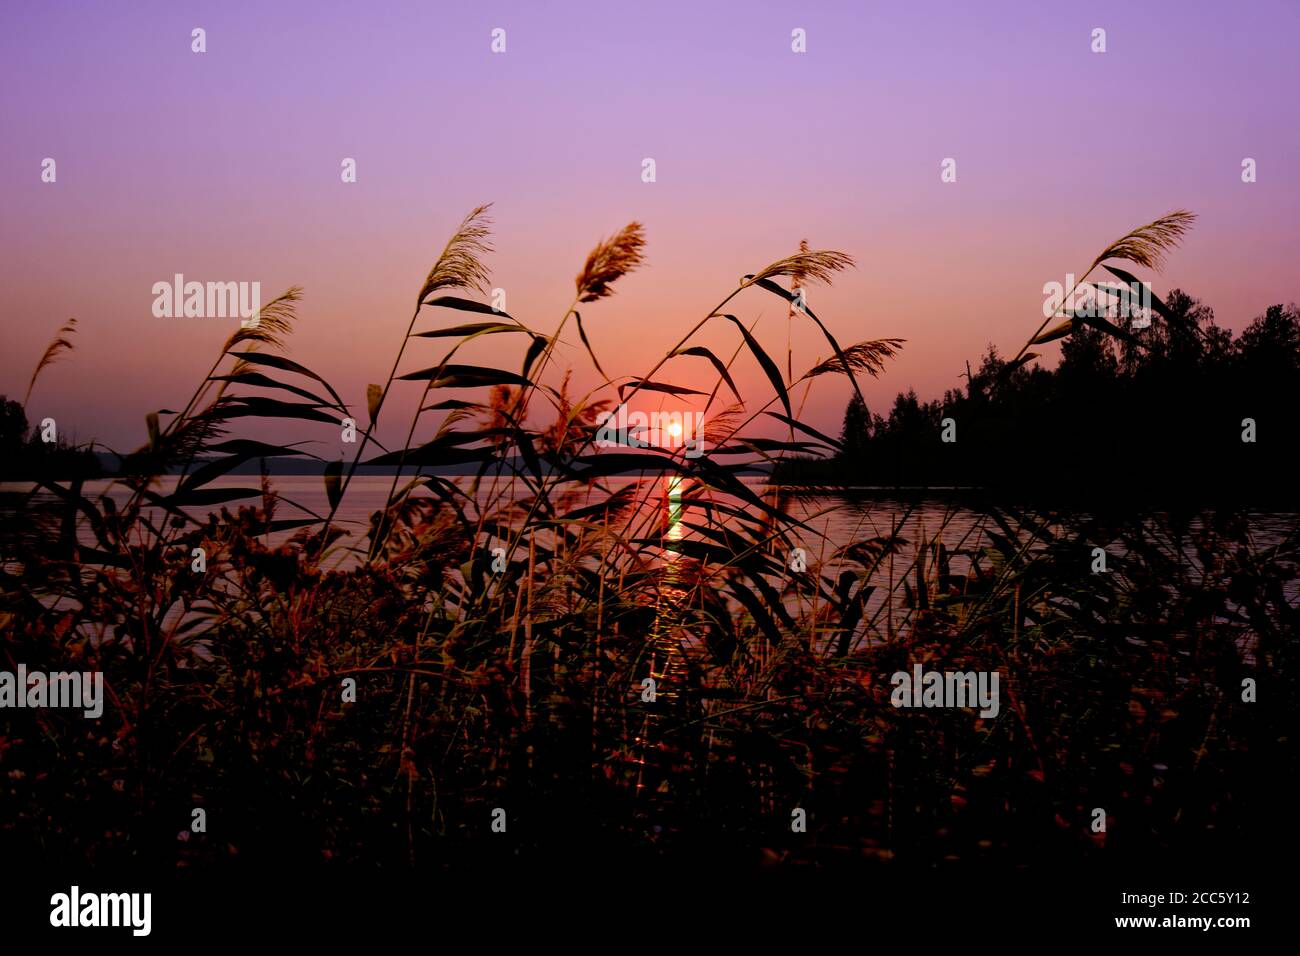 Summer background - Sunset over the lake. Reeds with seed panicles. Romantic landscape. Outdoor travel and adventure. Stock Photo